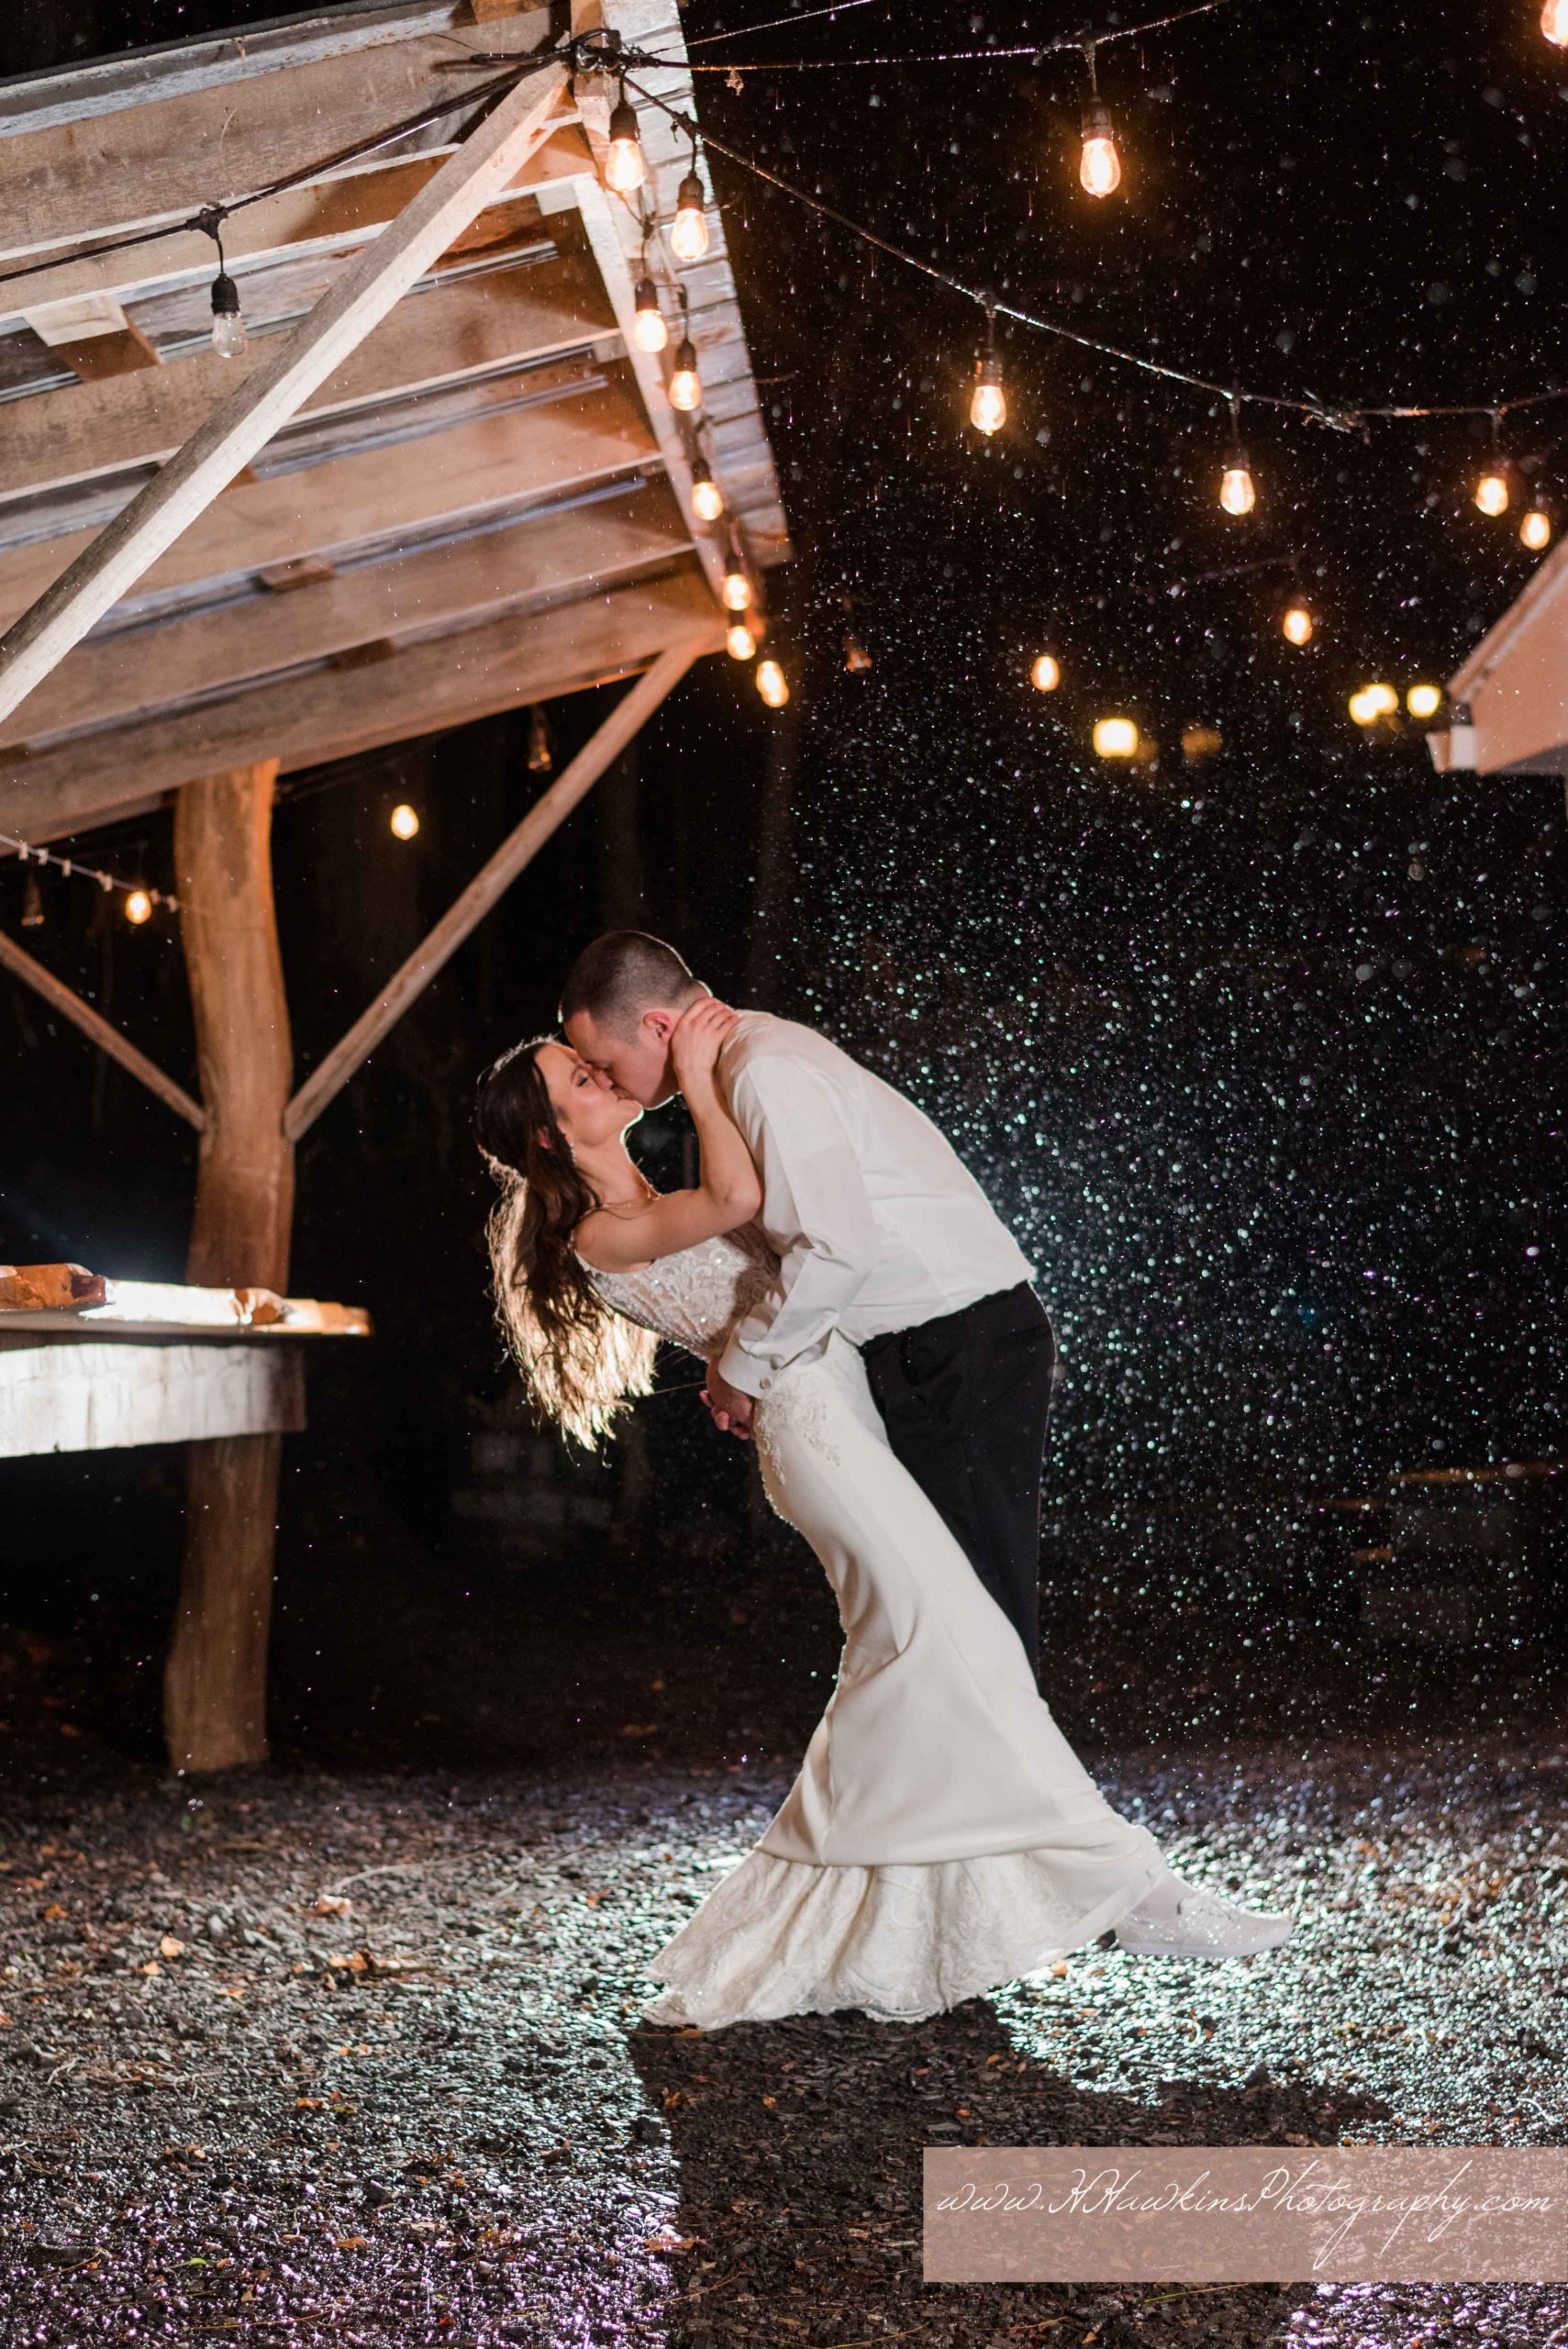 Epic night time shot of bride and groom kissing with backlighting and rain and cafe lights at Springside Inn in Auburn NY by Syracuse photographer